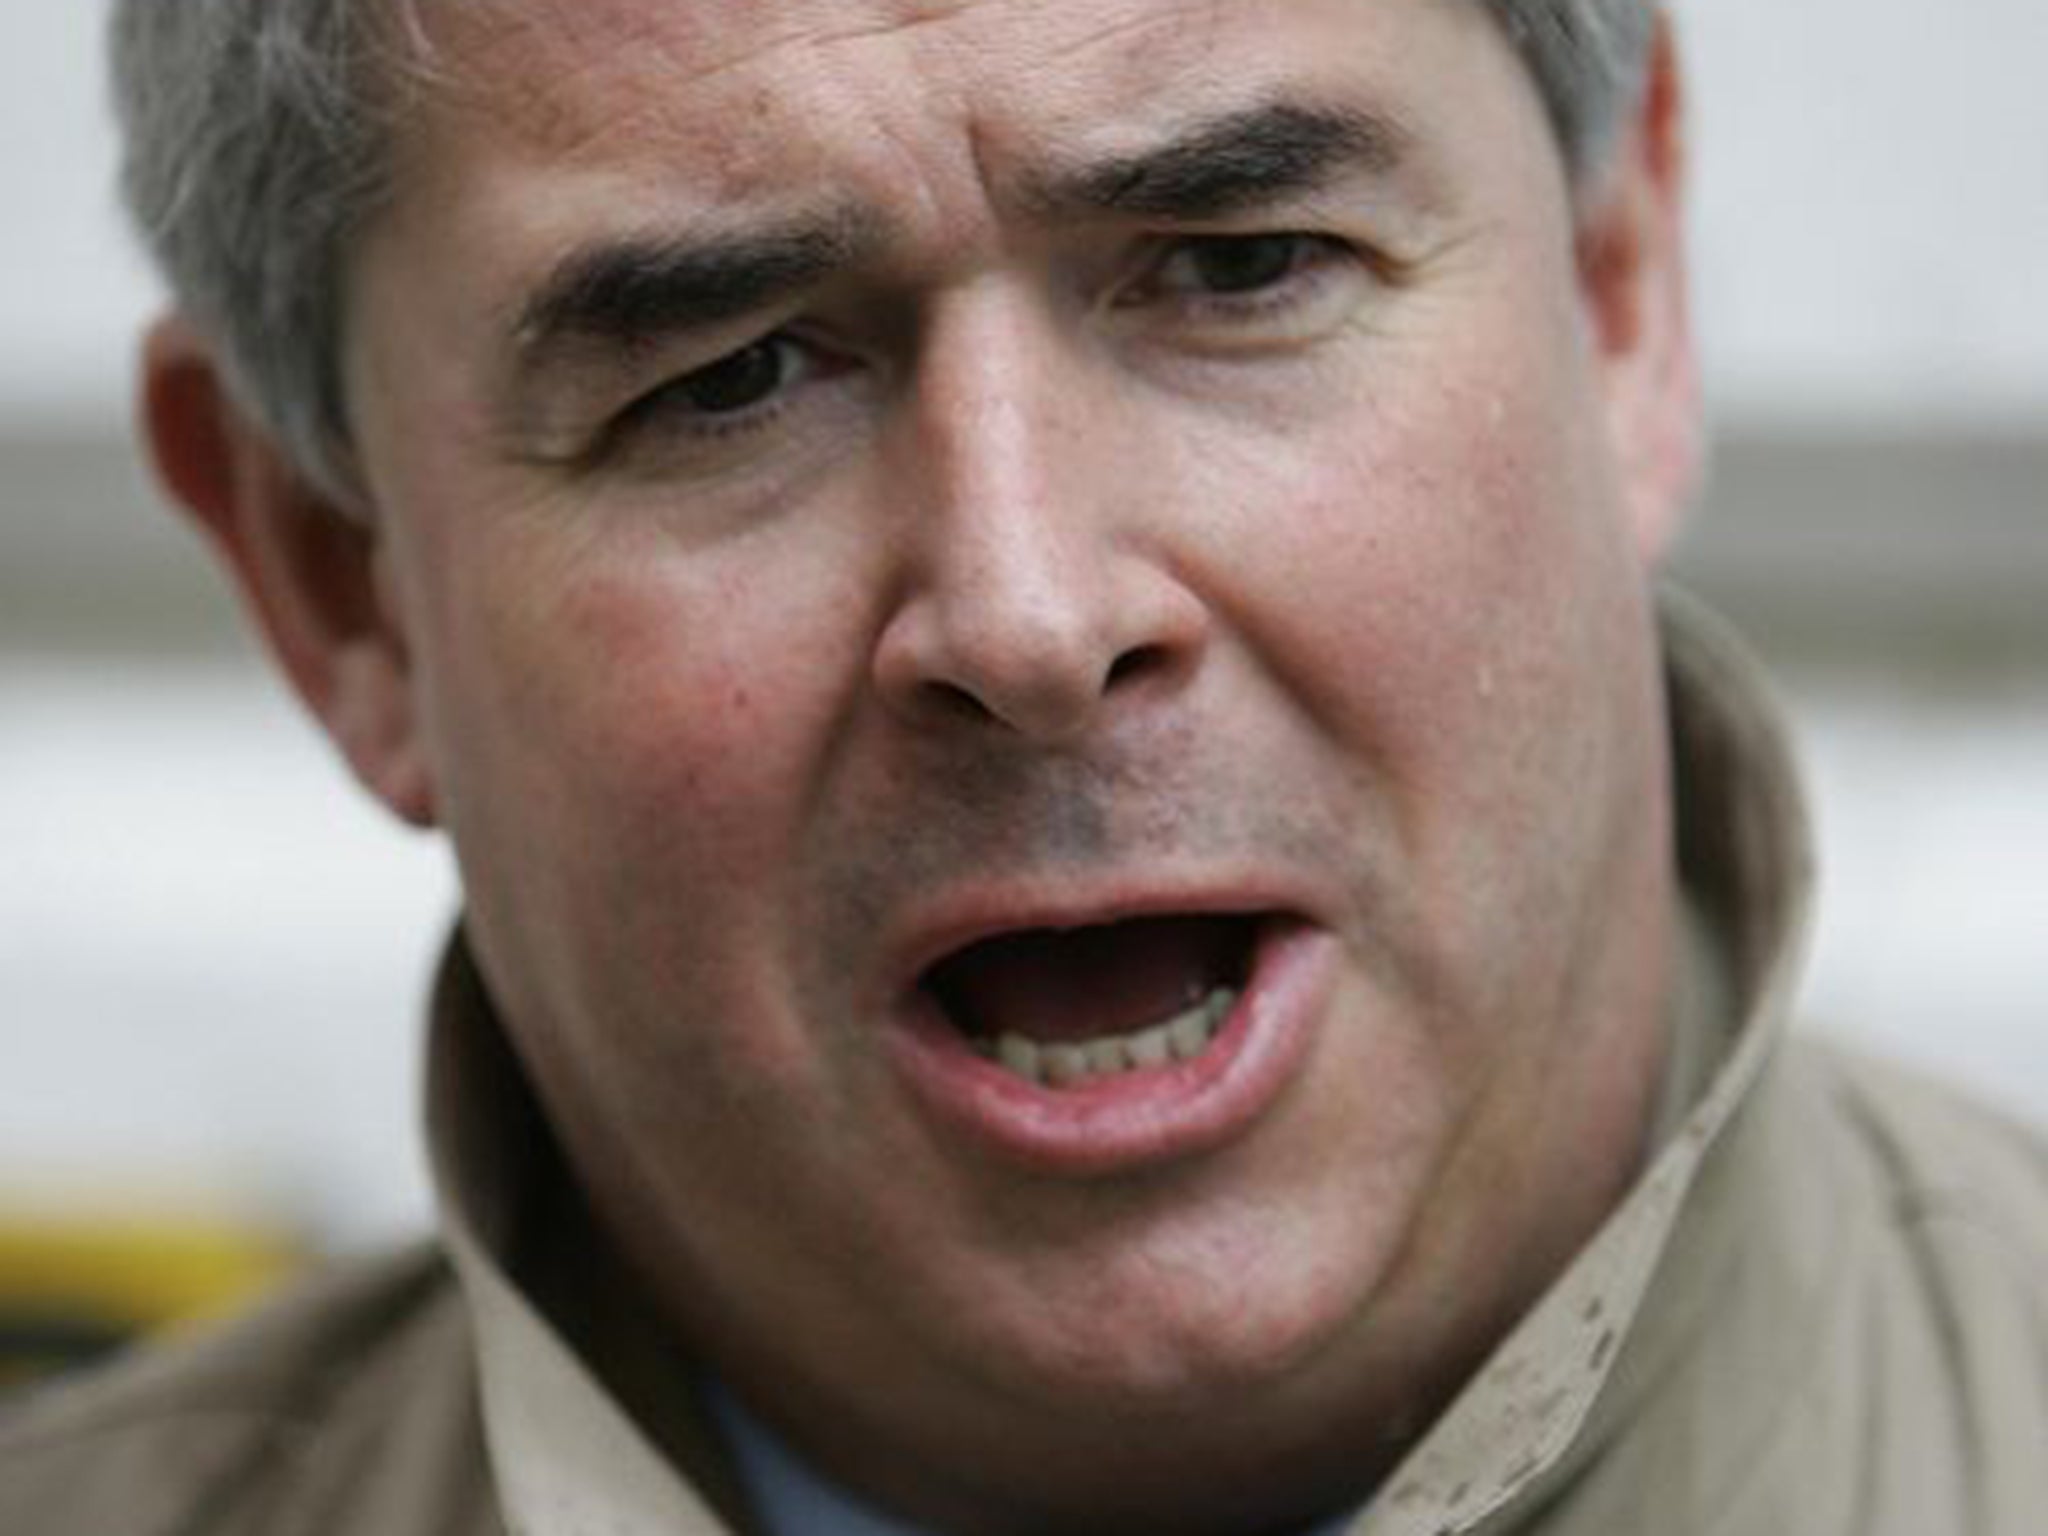 Geoffrey Cox has already earned more than £376,000 this year practising law